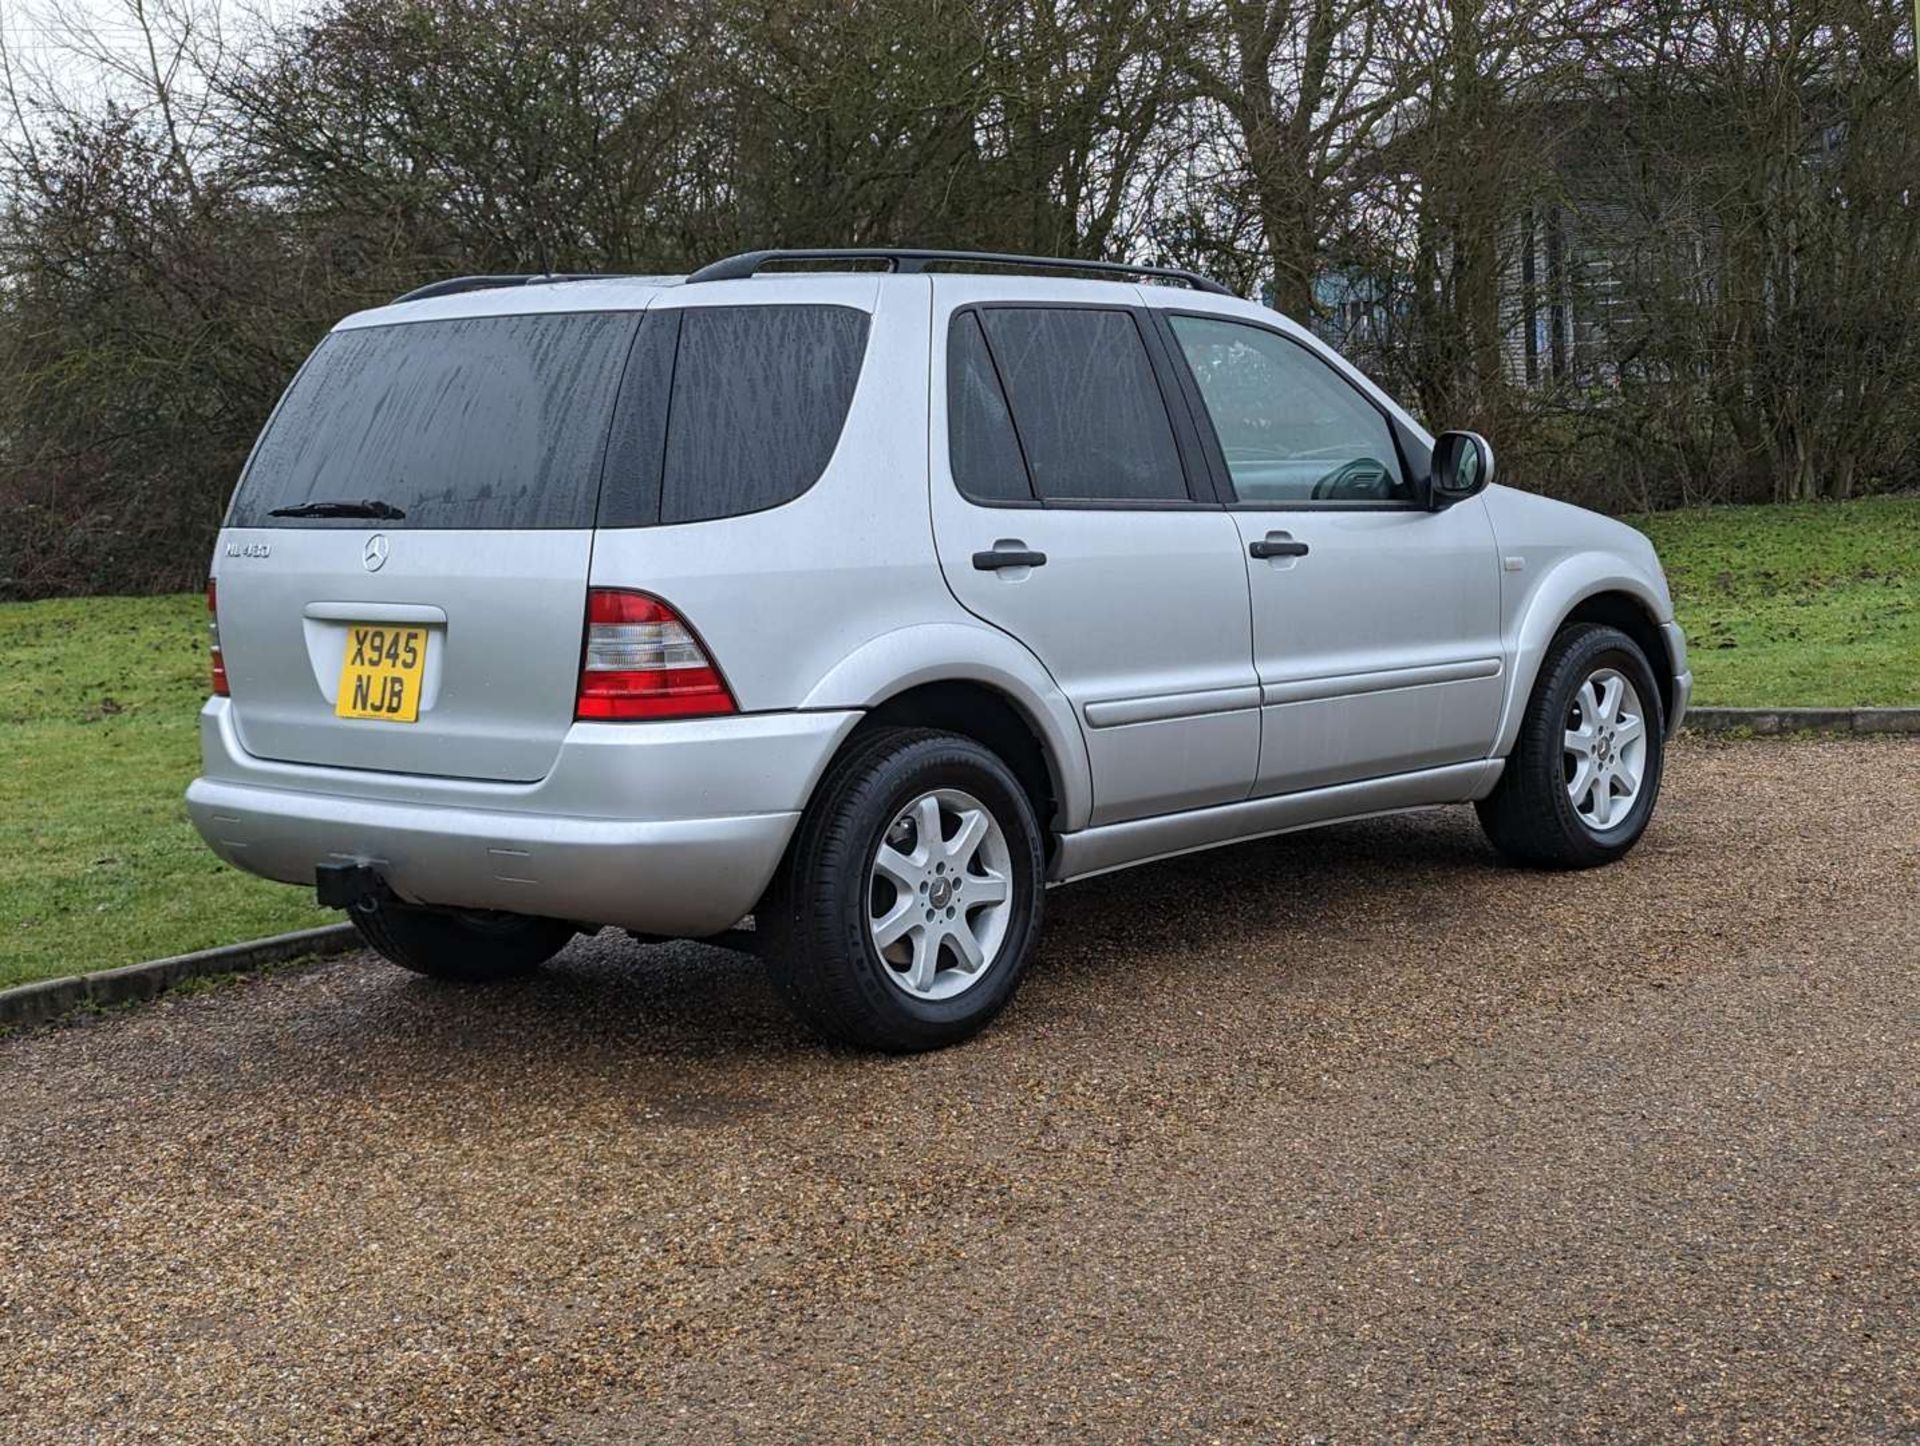 2001 MERCEDES ML 430 LHD - Image 7 of 24